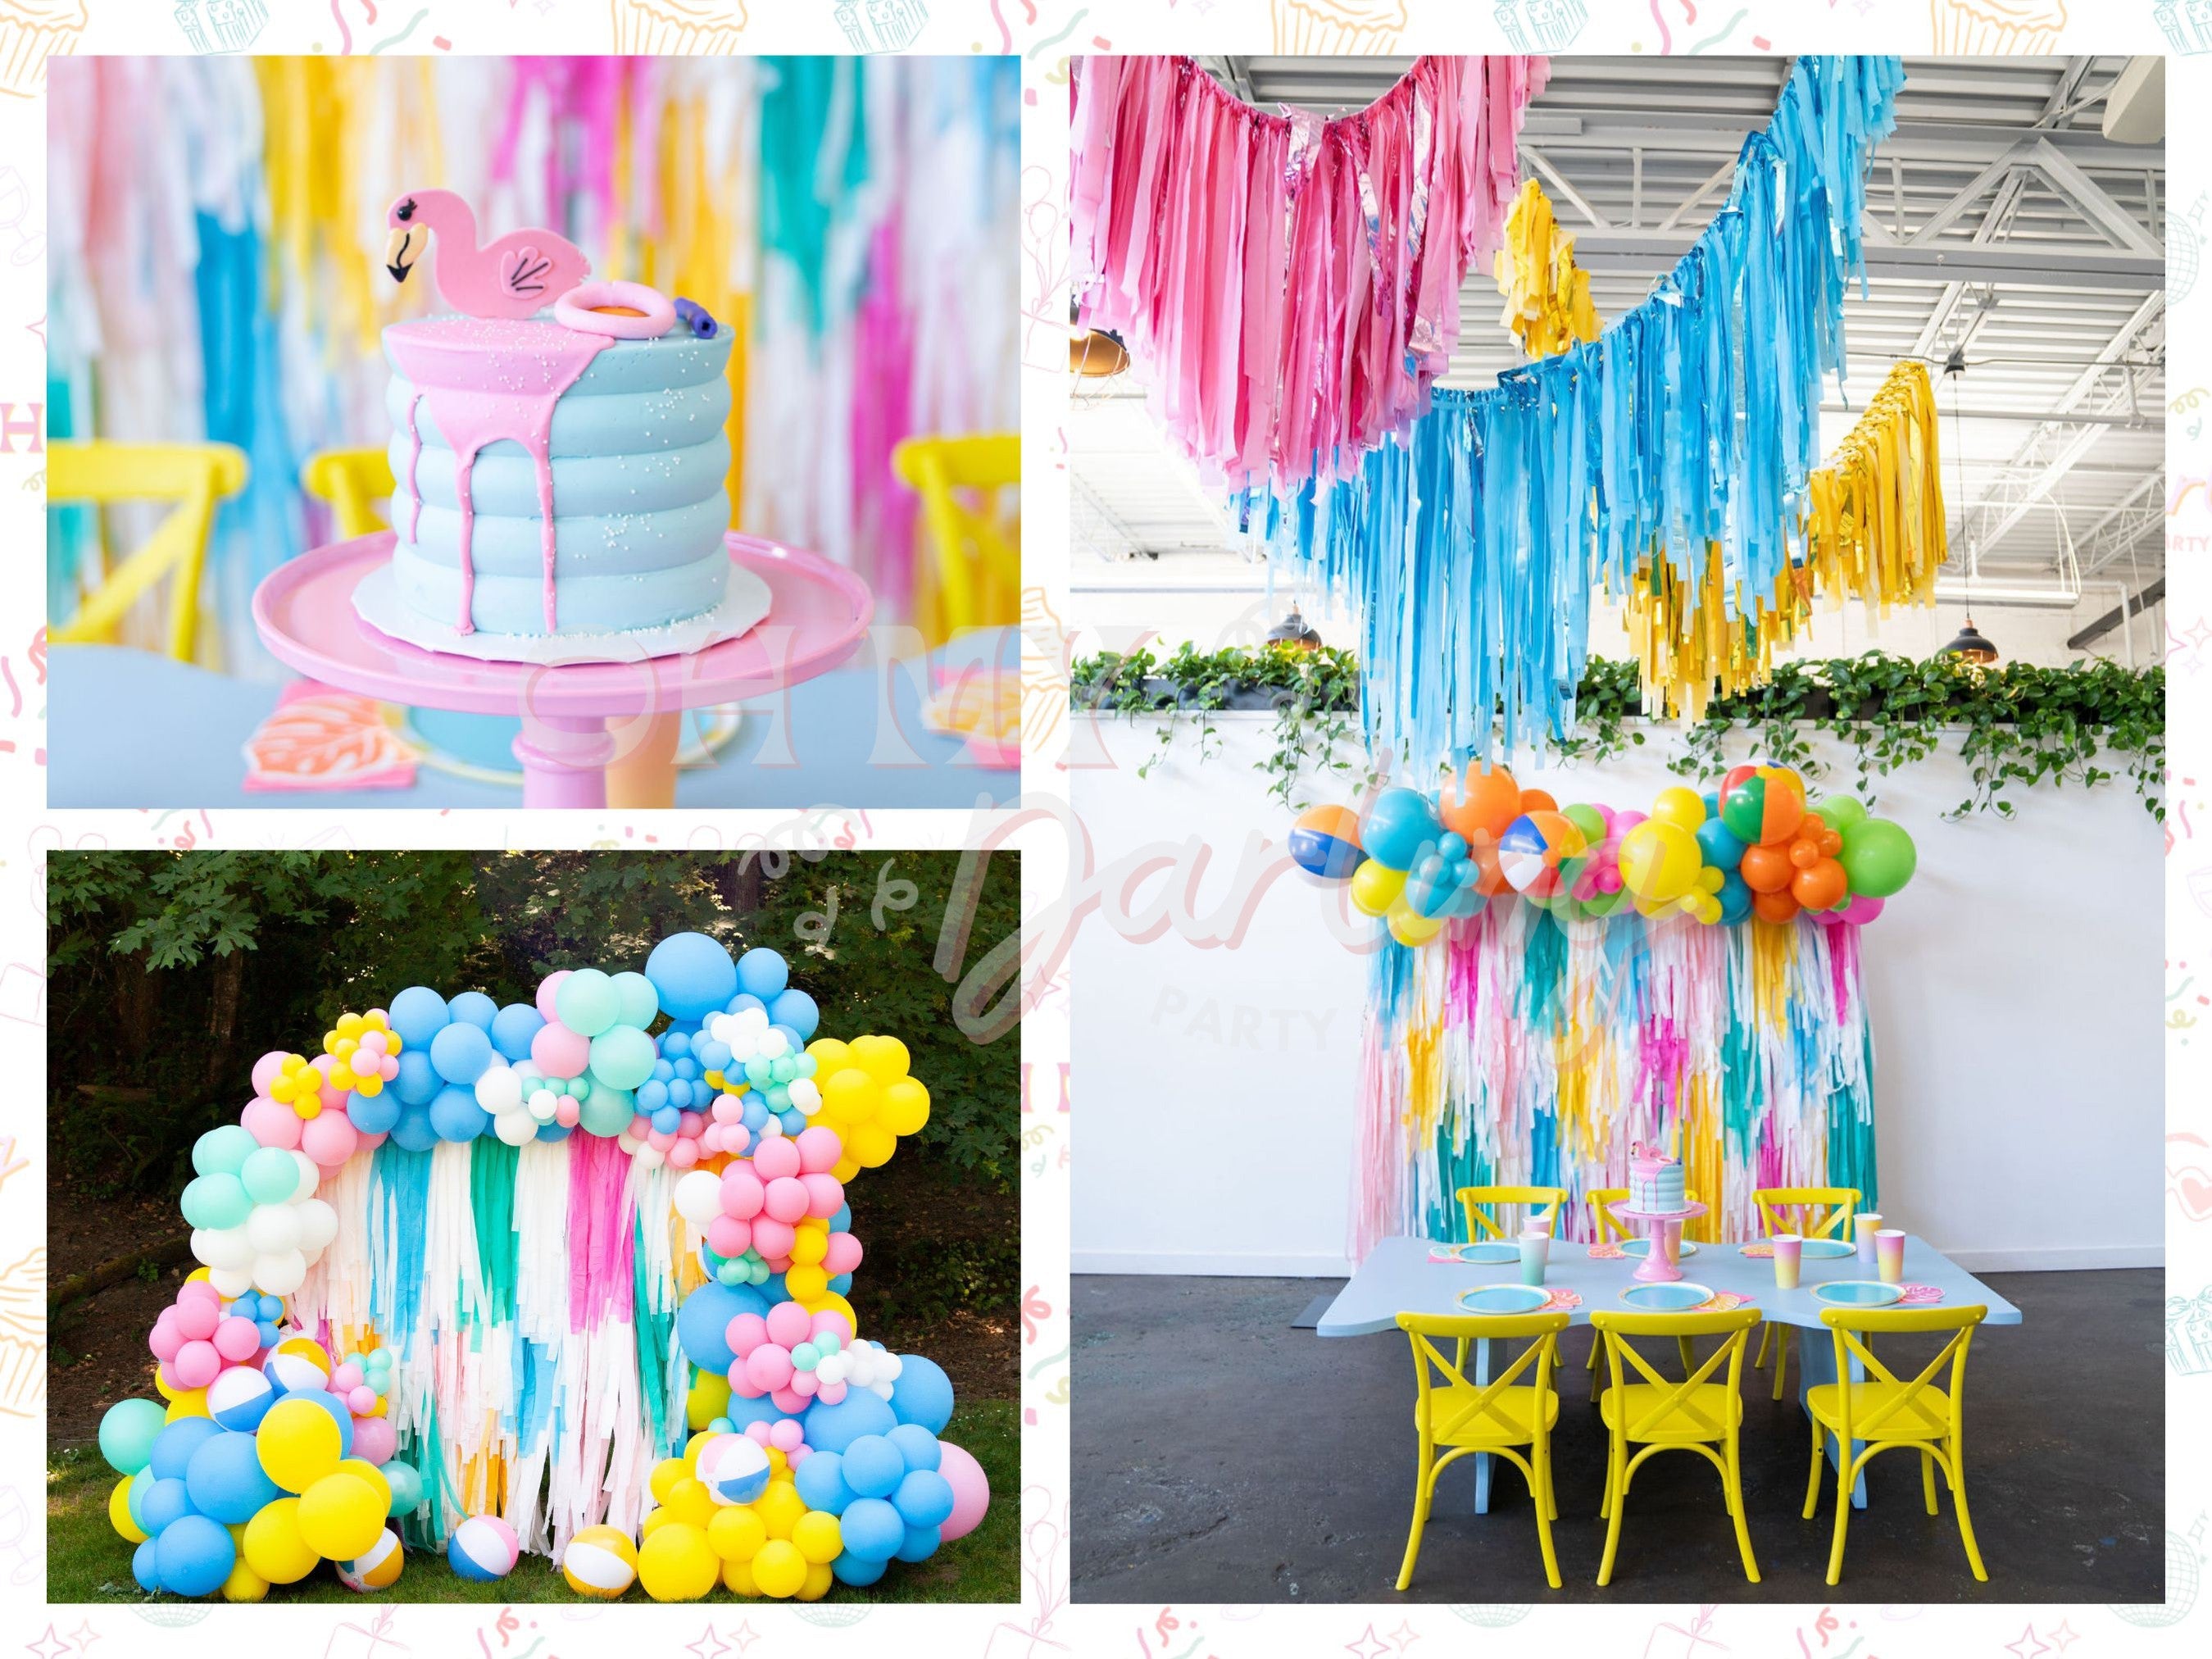 Beach Ball Vibes Backdrop-Fringe Backdrop-Party Decor-Oh My Darling Party Co-Oh My Darling Party Co-bachelorette, backdrops for party, balloon garlands, beach, Birthday Party, blue and white, boy party, bright, bright rainbow, cinco de mayo, colorful, default, encanto, fiesta, fringe garland, Fringe Streamers, girl party, gn party, GOLD BACKDROP, goldenrod, Kids Birthday, Kids Party, luau, magenta, metallic gold, OMDPC, orange, ORANGE BACKDROP, party backdrops, peach, pink and white, PINK BACKDROP, pool par